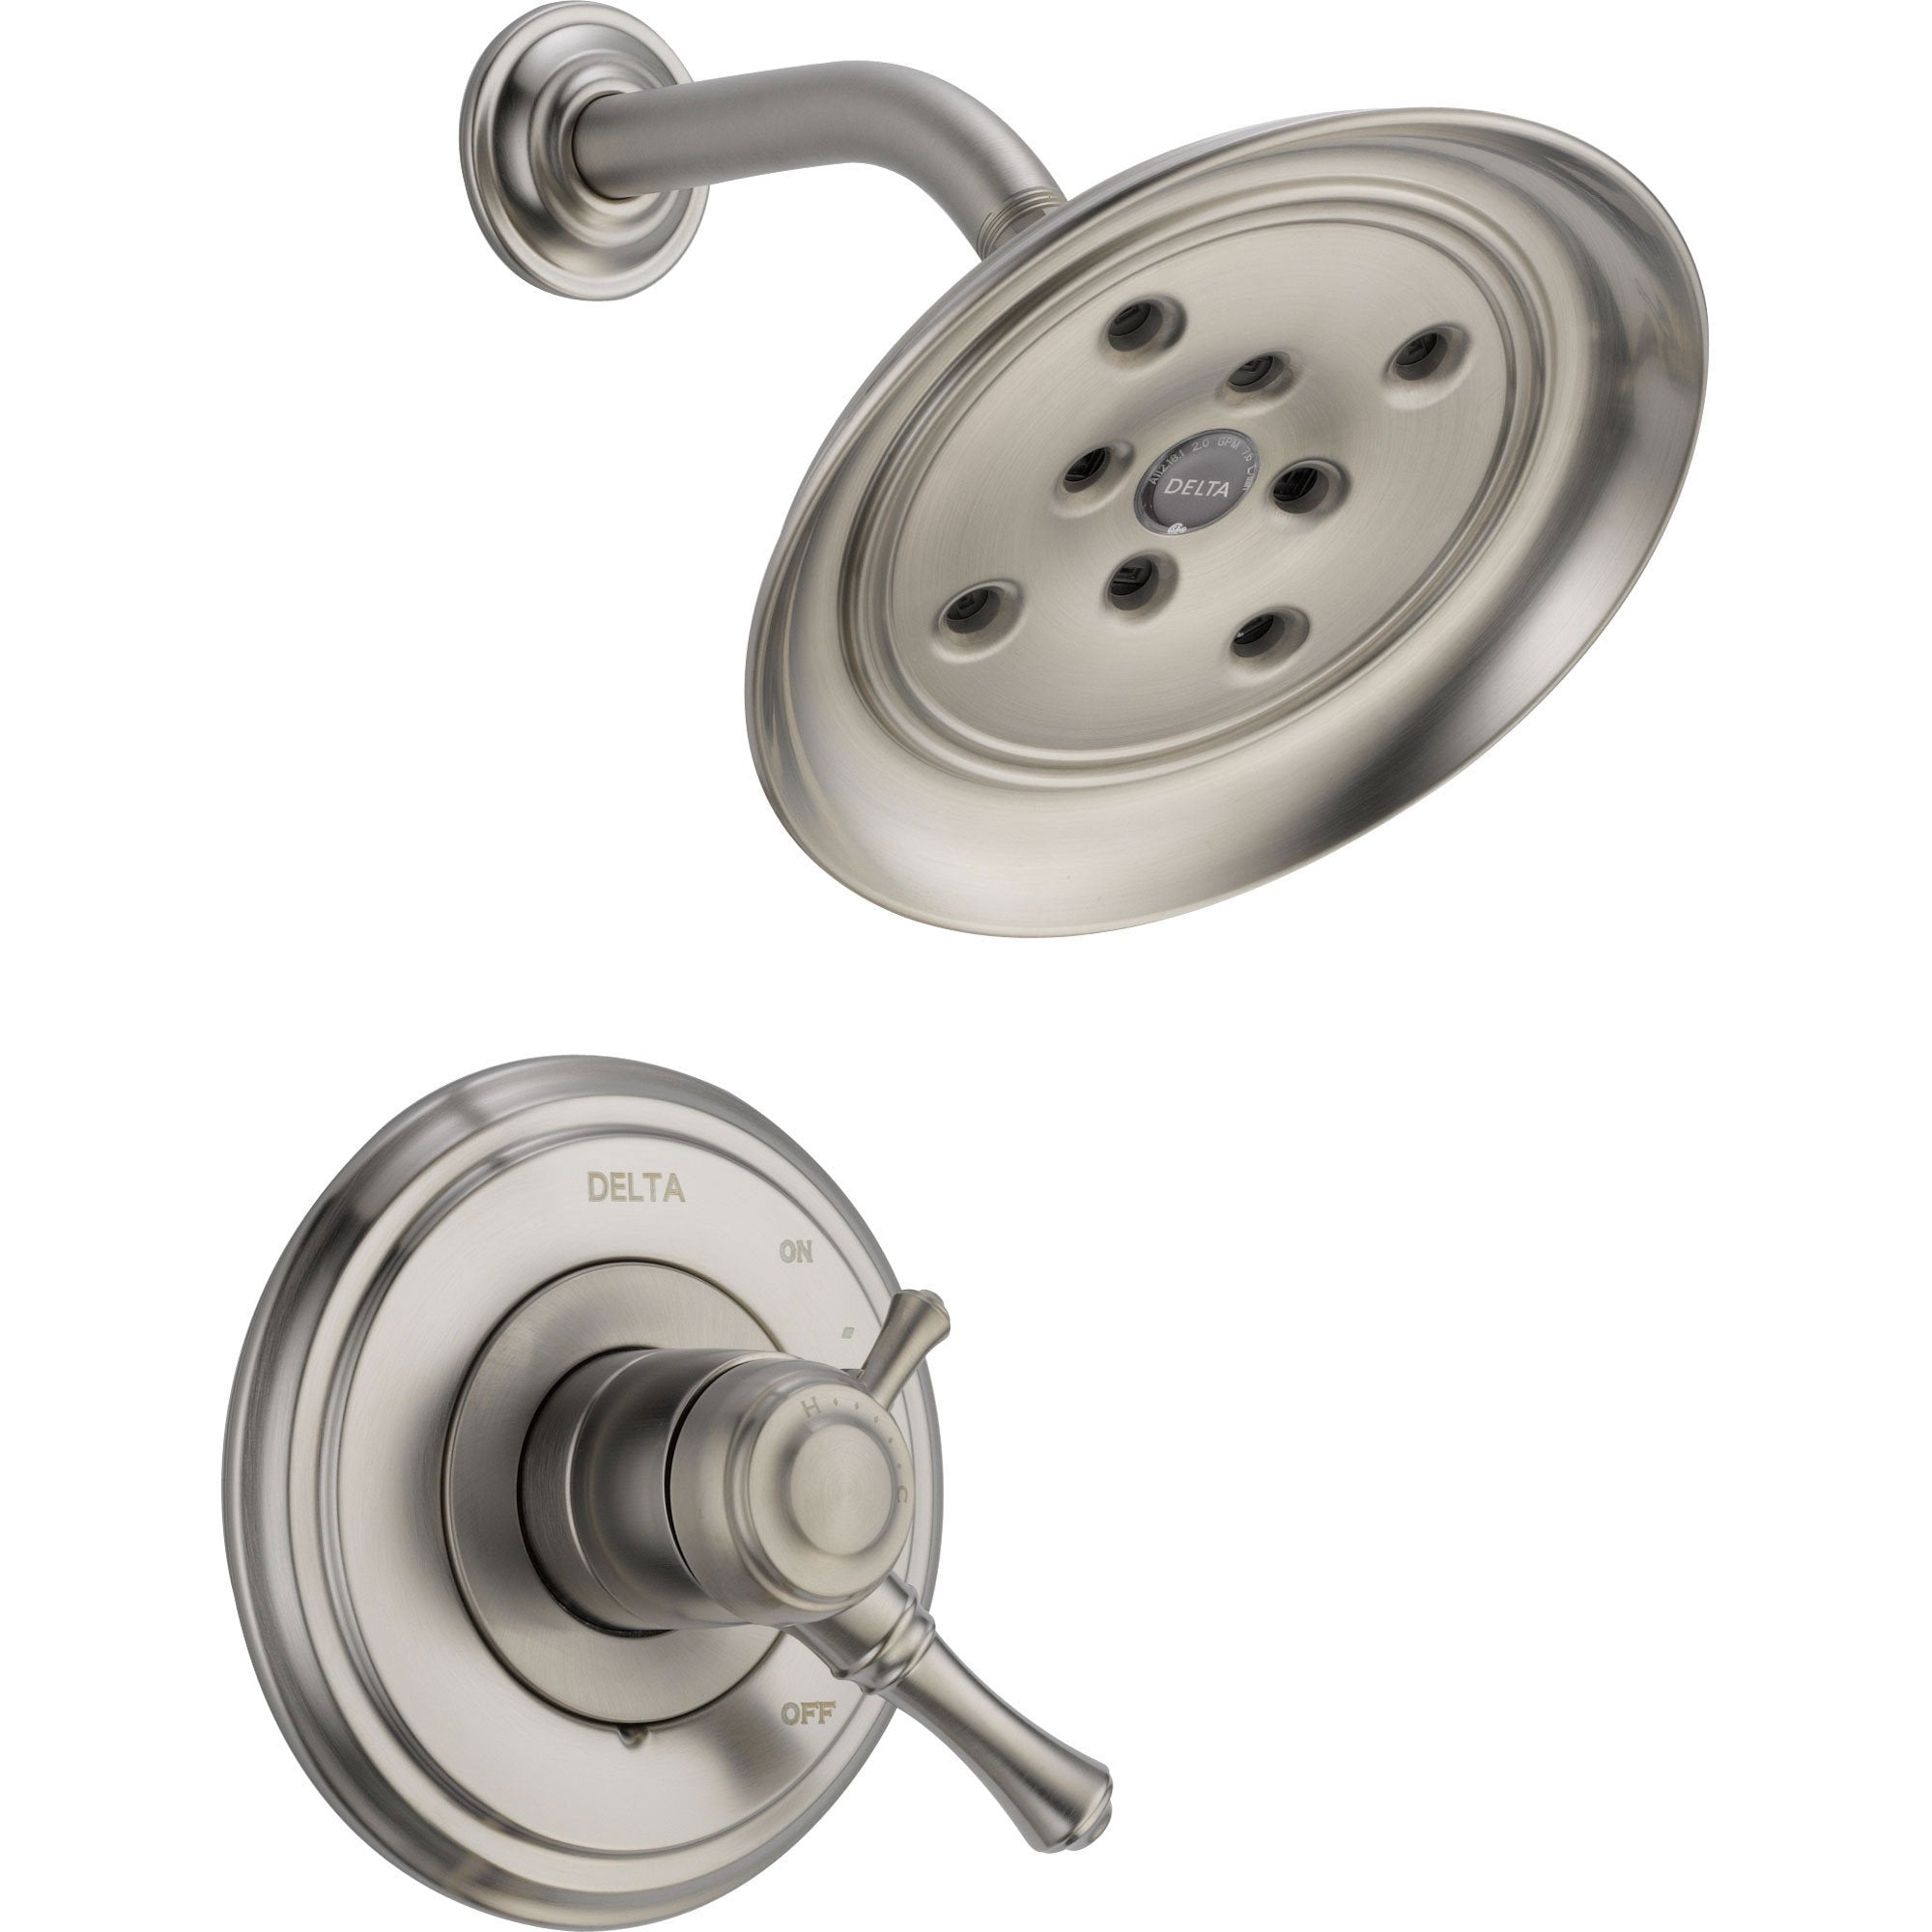 Delta Cassidy Dual Control Stainless Steel Finish Shower Faucet with Valve D791V